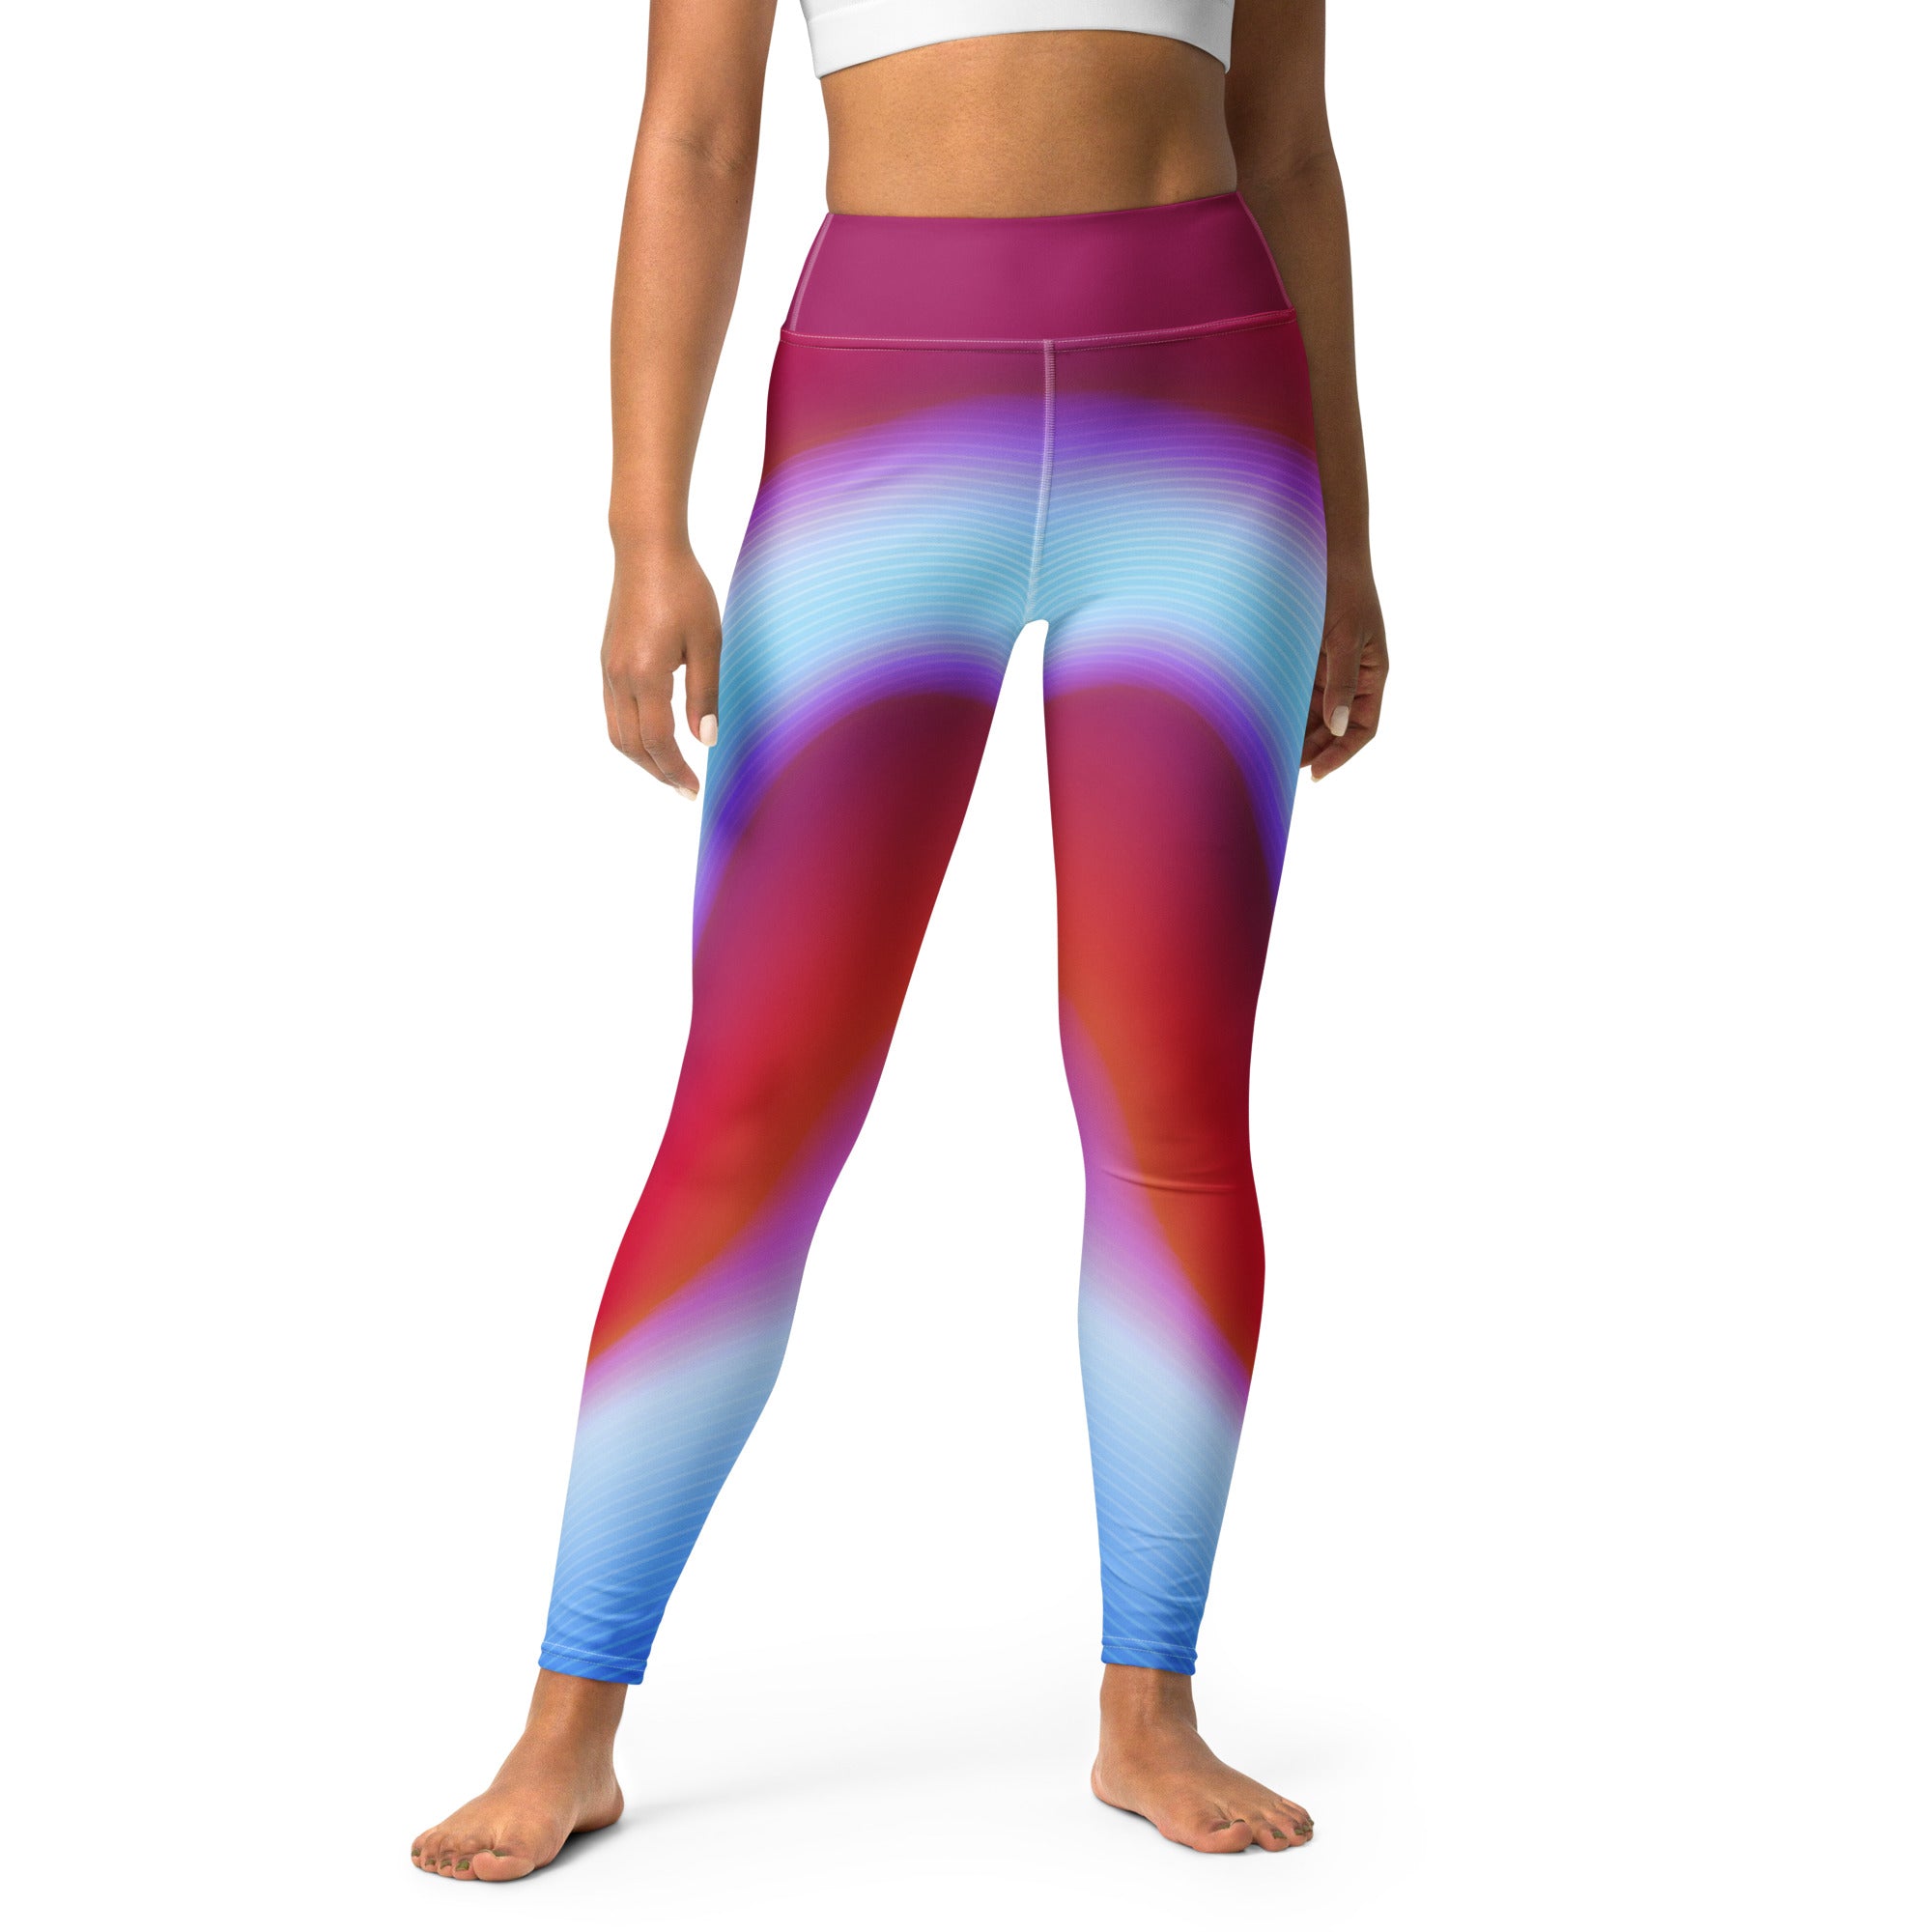 Experiencing a yoga session enhanced by the glow of Sunset Wave Yoga Leggings.